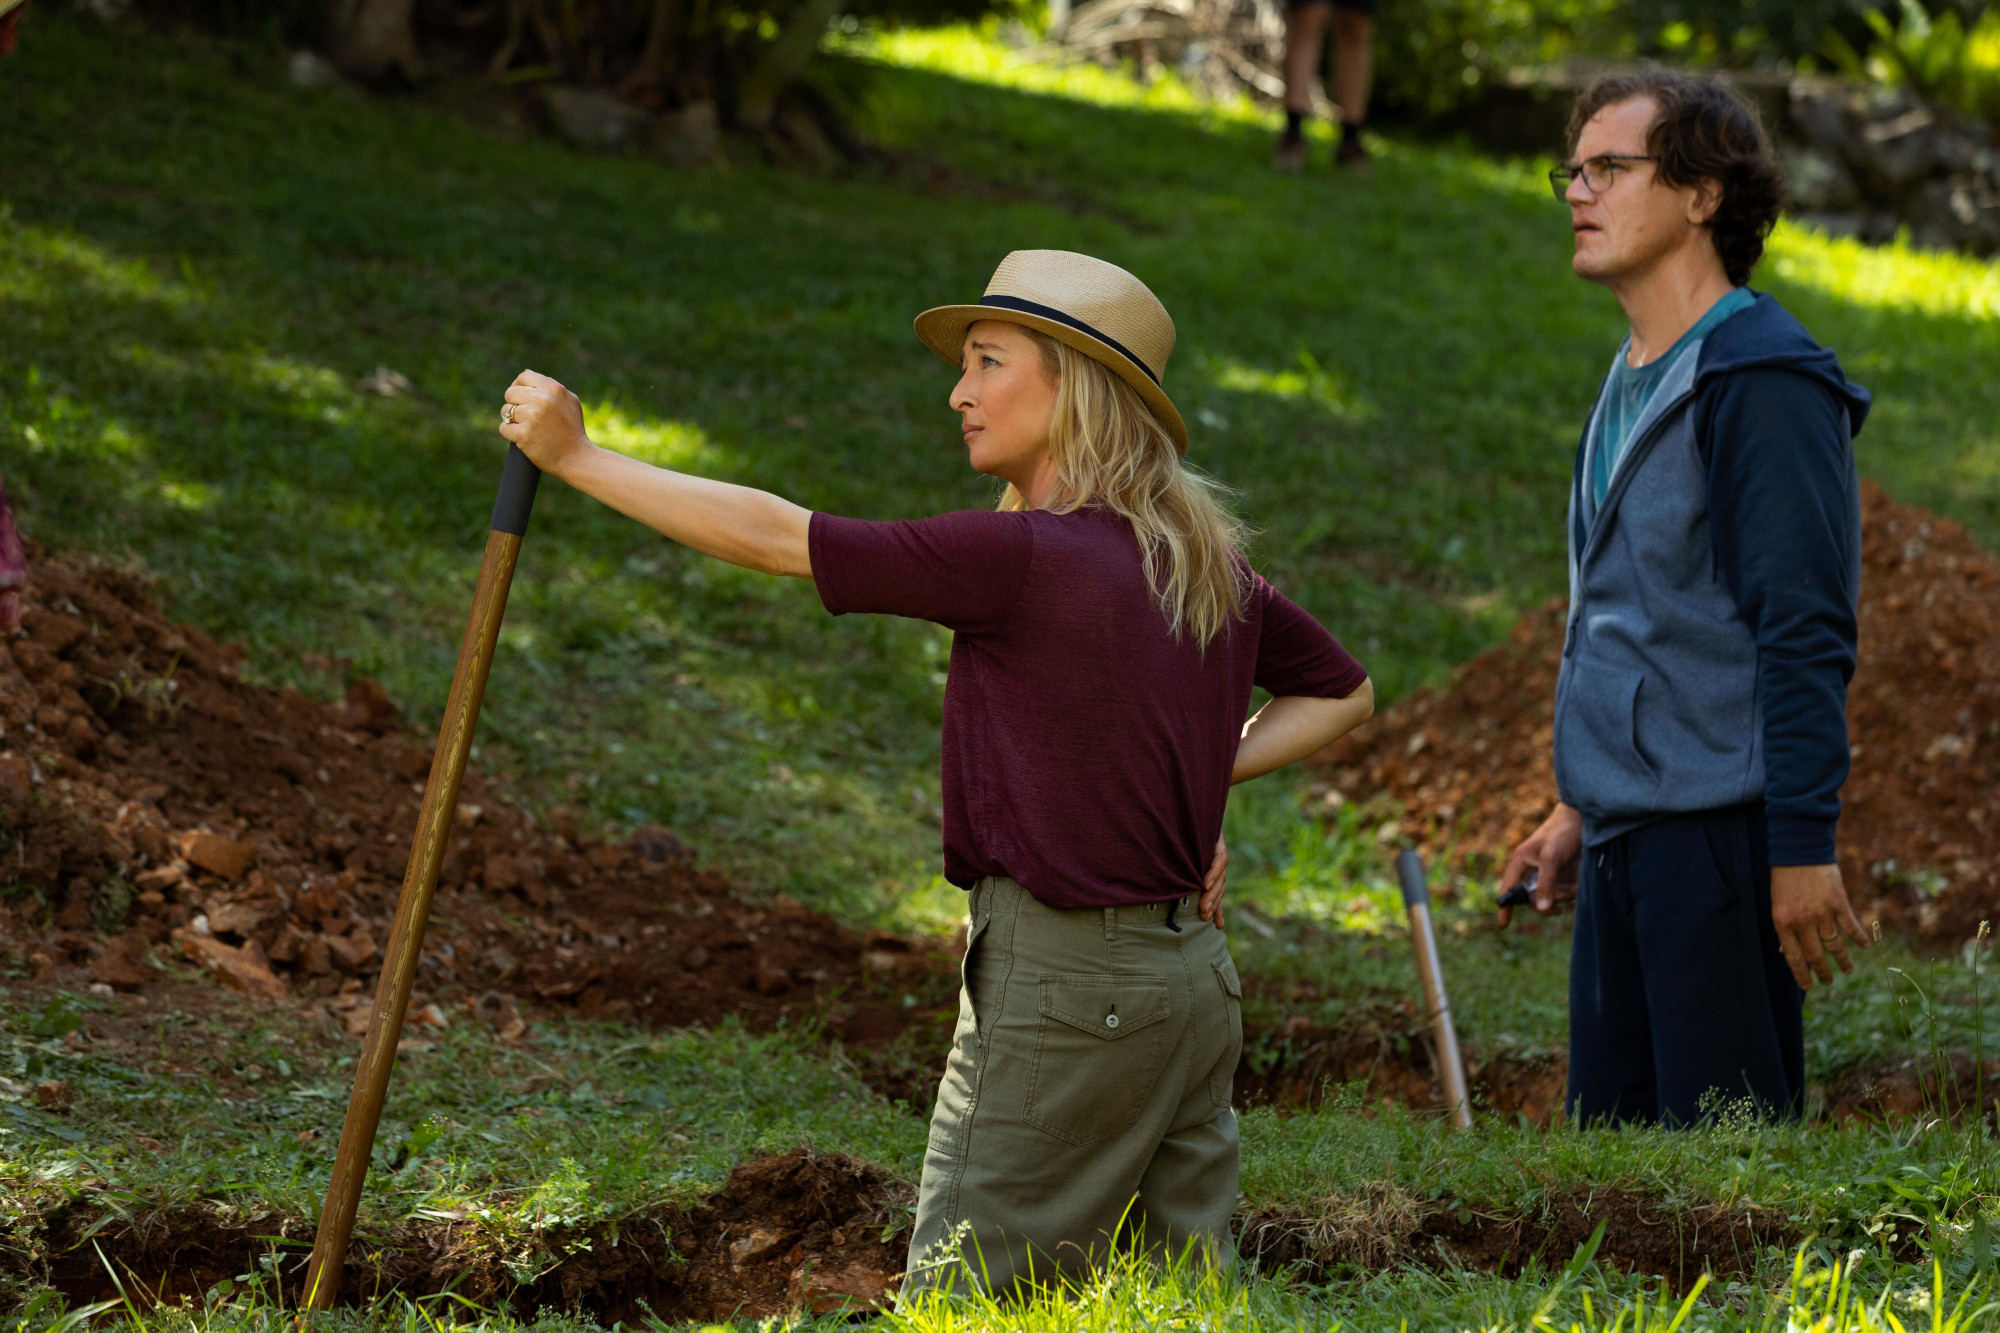 Heather (Asher Keddie) and Napoleon (Michael Shannon) digging with shovels in Hulu's 'Nine Perfect Strangers.' The image shows their side profiles, and they're looking at something off-screen to the left.